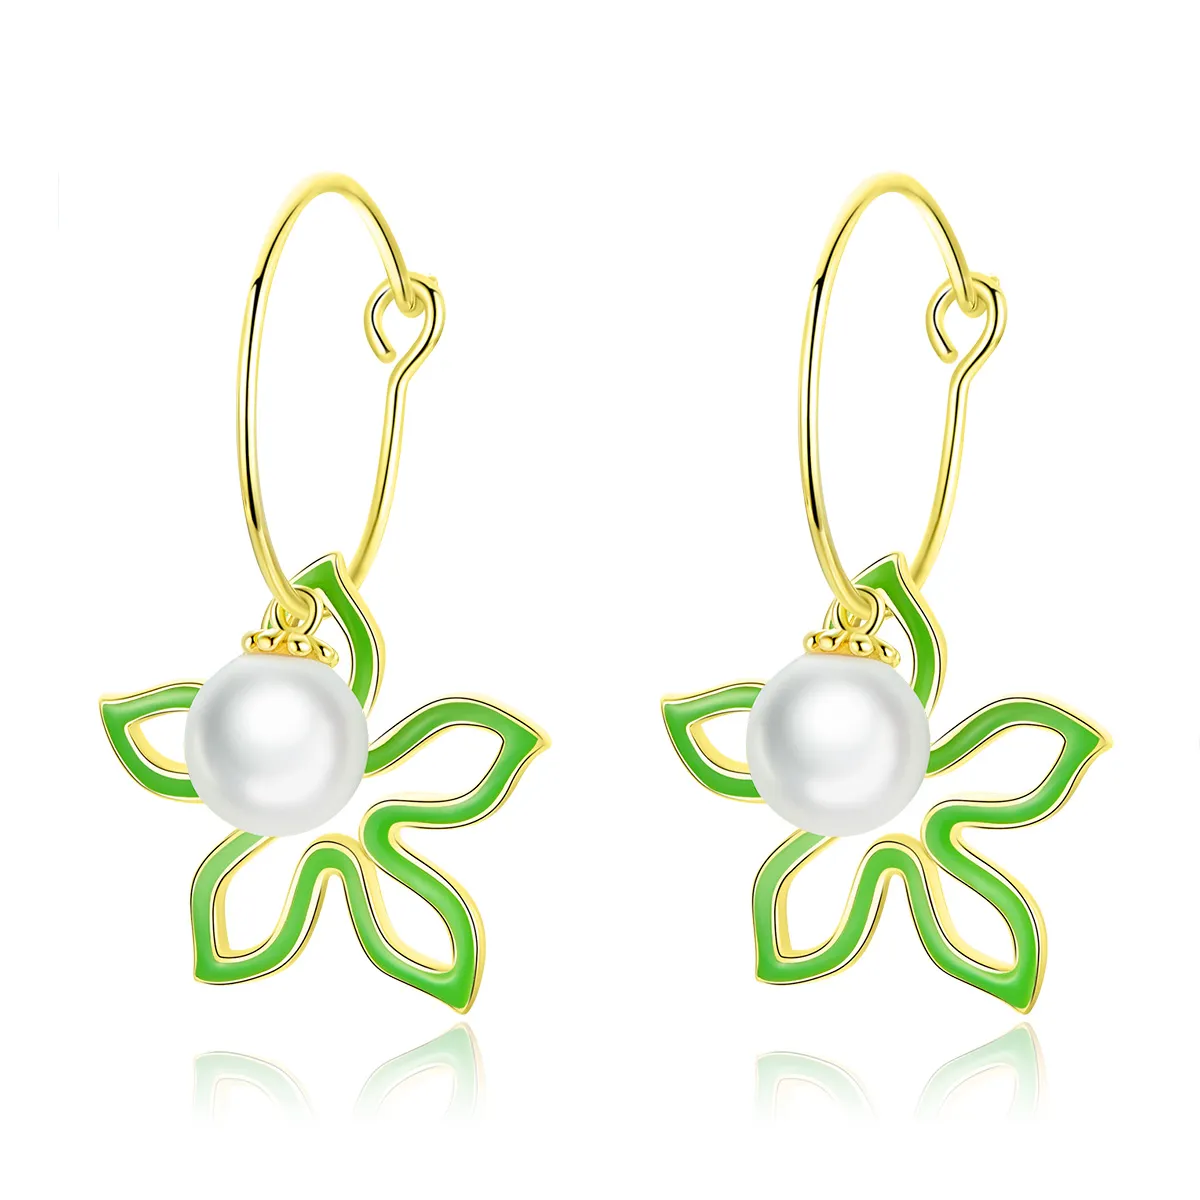 Pandora Style Gold-Plated Summer Flower Hanging Earrings - SCE679